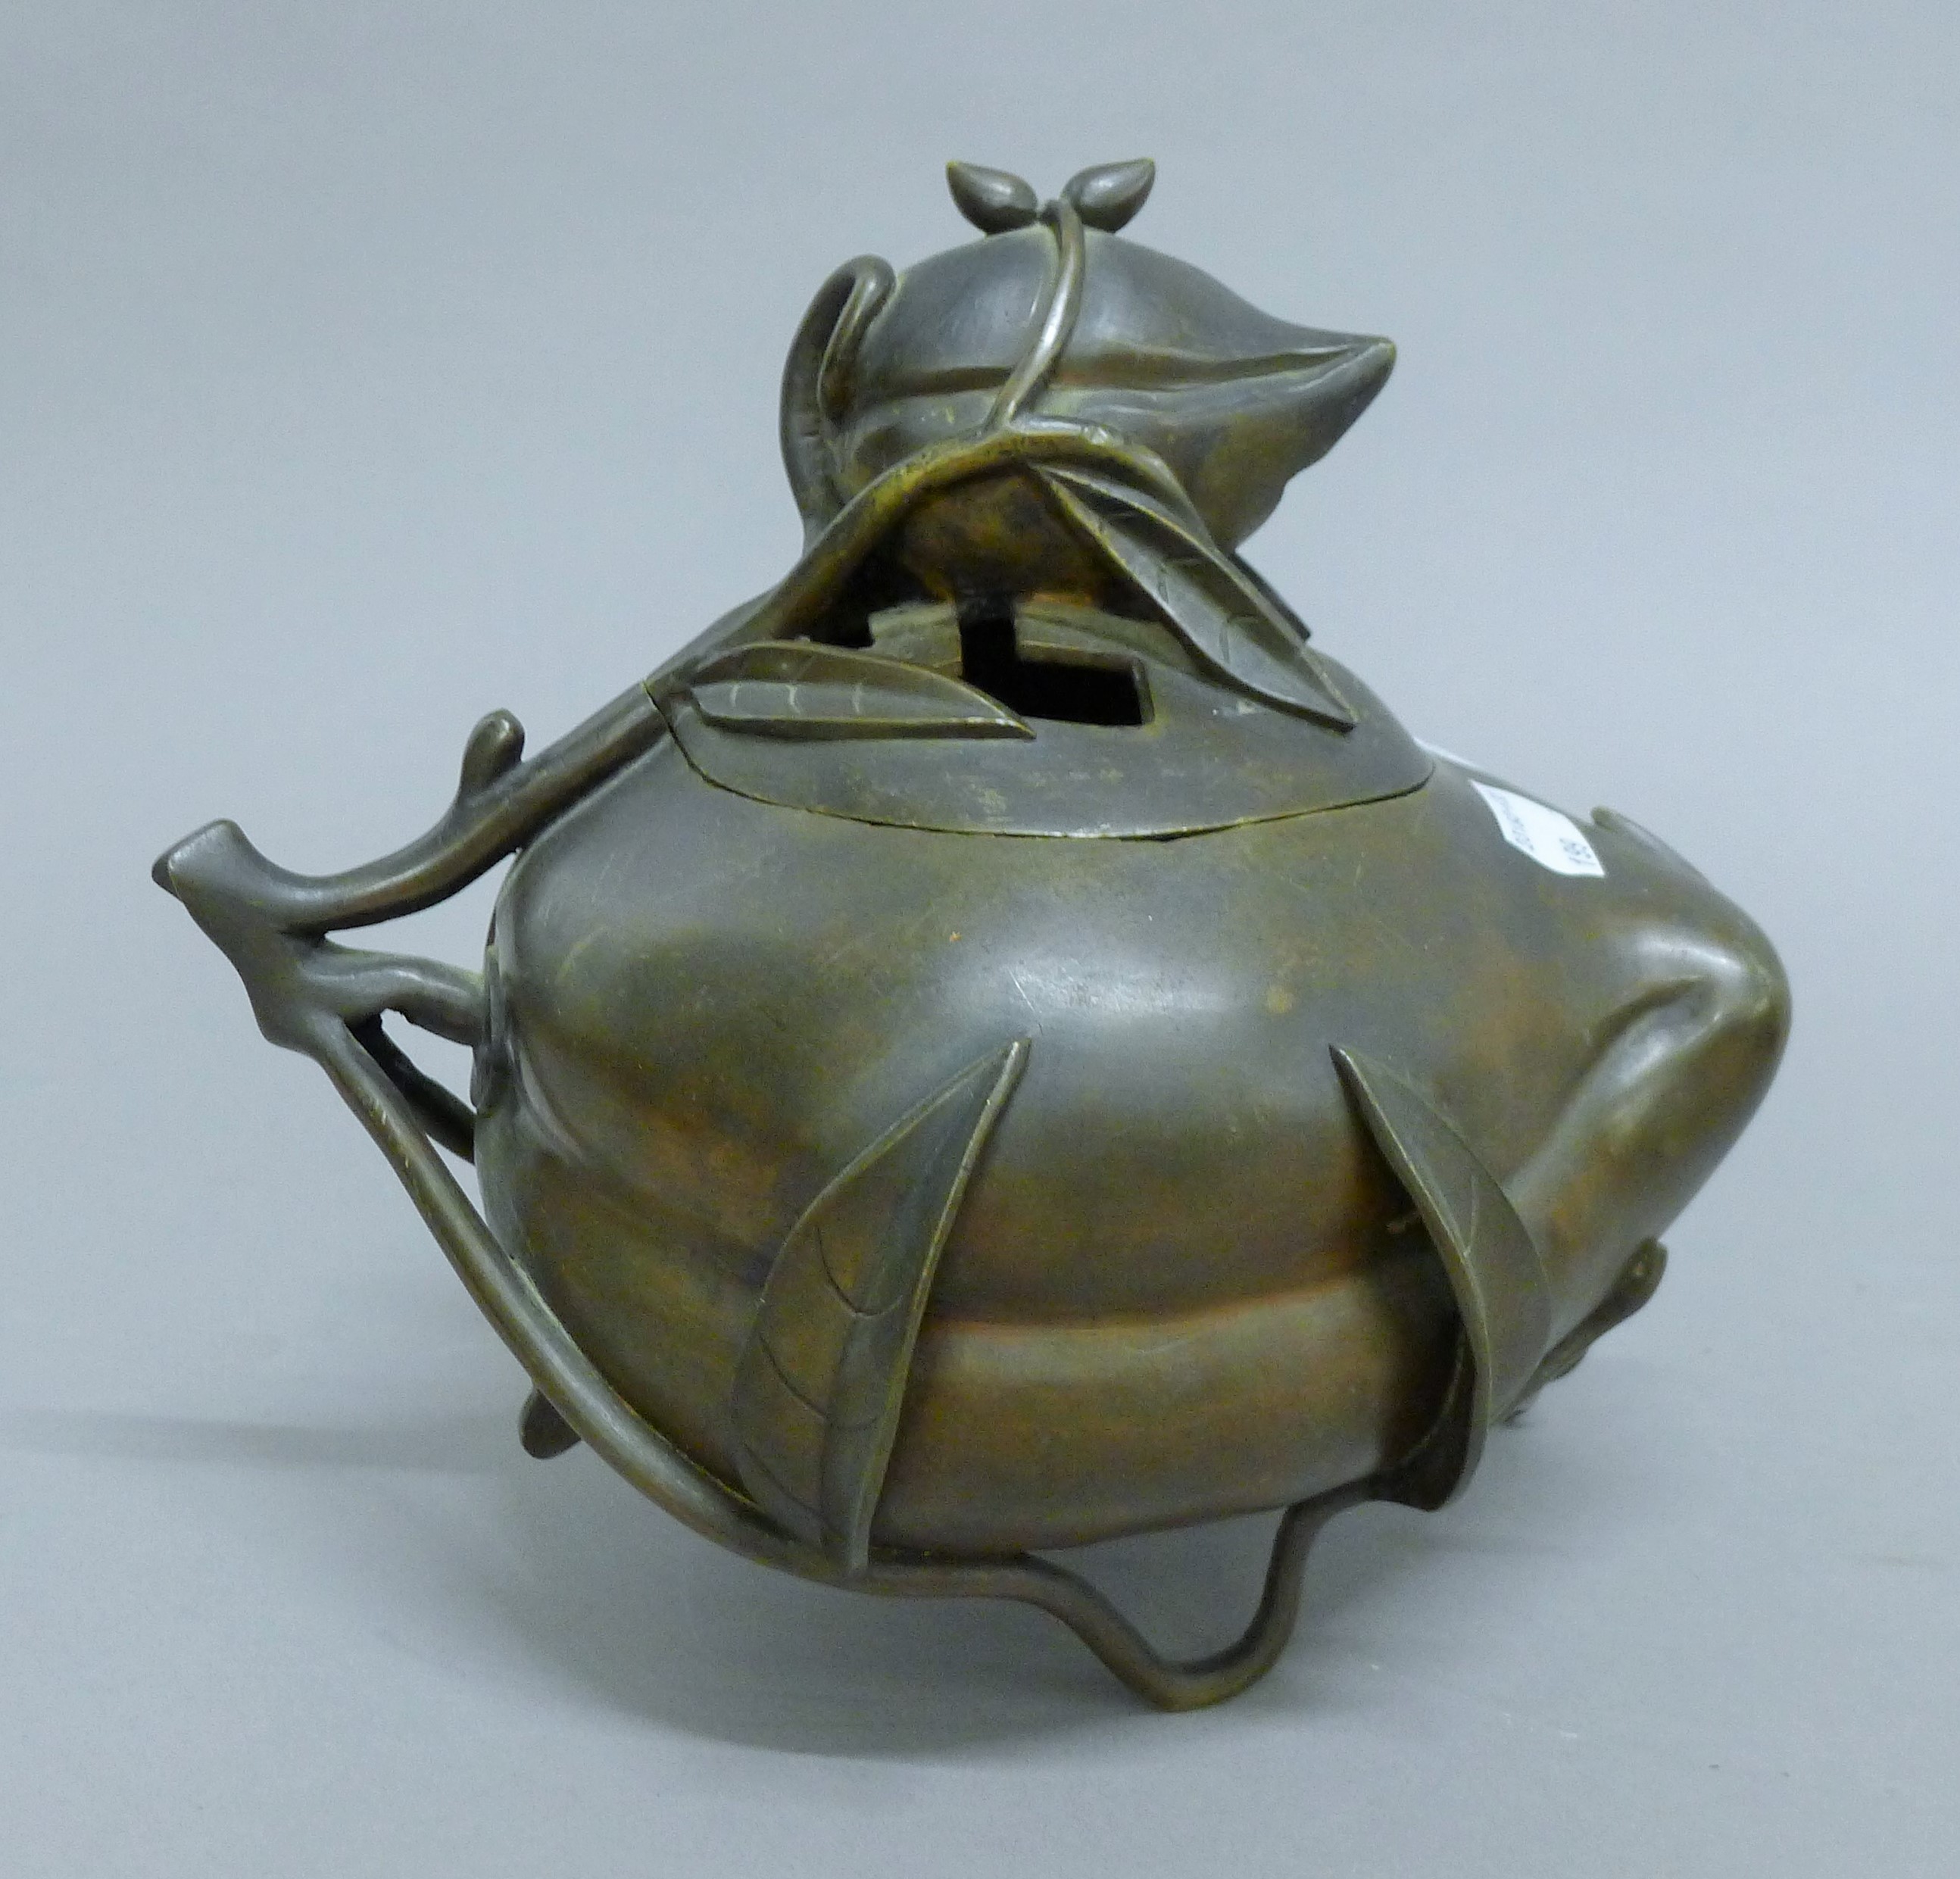 A 19th century Chinese bronze censer formed as a peach. 20 cm high.